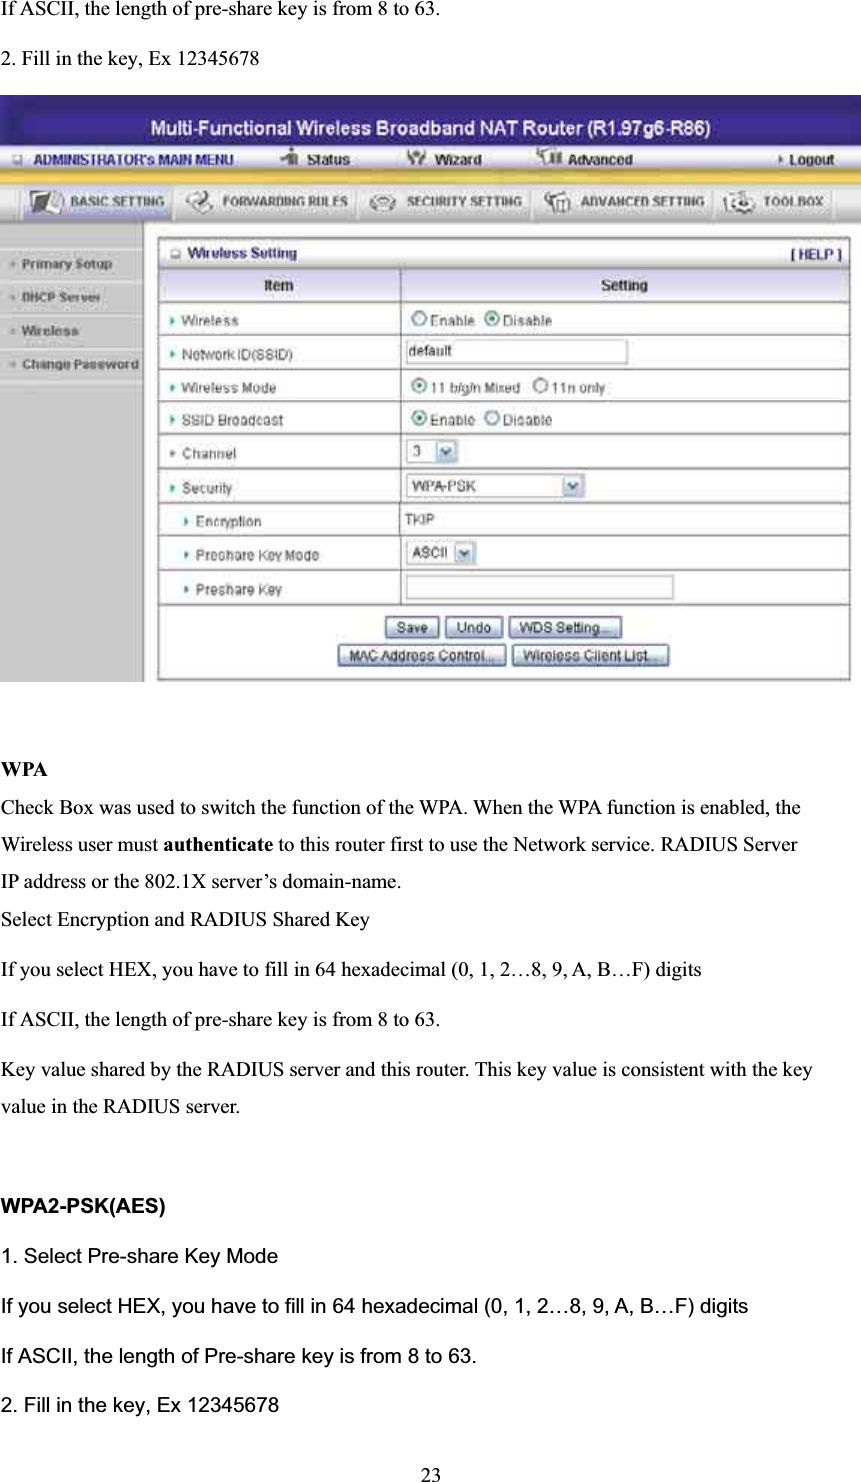 If ASCII, the length of pre-share key is from 8 to 63. 2. Fill in the key, Ex 12345678 WPA Check Box was used to switch the function of the WPA. When the WPA function is enabled, the Wireless user must authenticate to this router first to use the Network service. RADIUS Server IP address or the 802.1X server’s domain-name.   Select Encryption and RADIUS Shared Key If you select HEX, you have to fill in 64 hexadecimal (0, 1, 2…8, 9, A, B…F) digits If ASCII, the length of pre-share key is from 8 to 63. Key value shared by the RADIUS server and this router. This key value is consistent with the key value in the RADIUS server. WPA2-PSK(AES)1. Select Pre-share Key Mode If you select HEX, you have to fill in 64 hexadecimal (0, 1, 2…8, 9, A, B…F) digits If ASCII, the length of Pre-share key is from 8 to 63. 2. Fill in the key, Ex 12345678 23